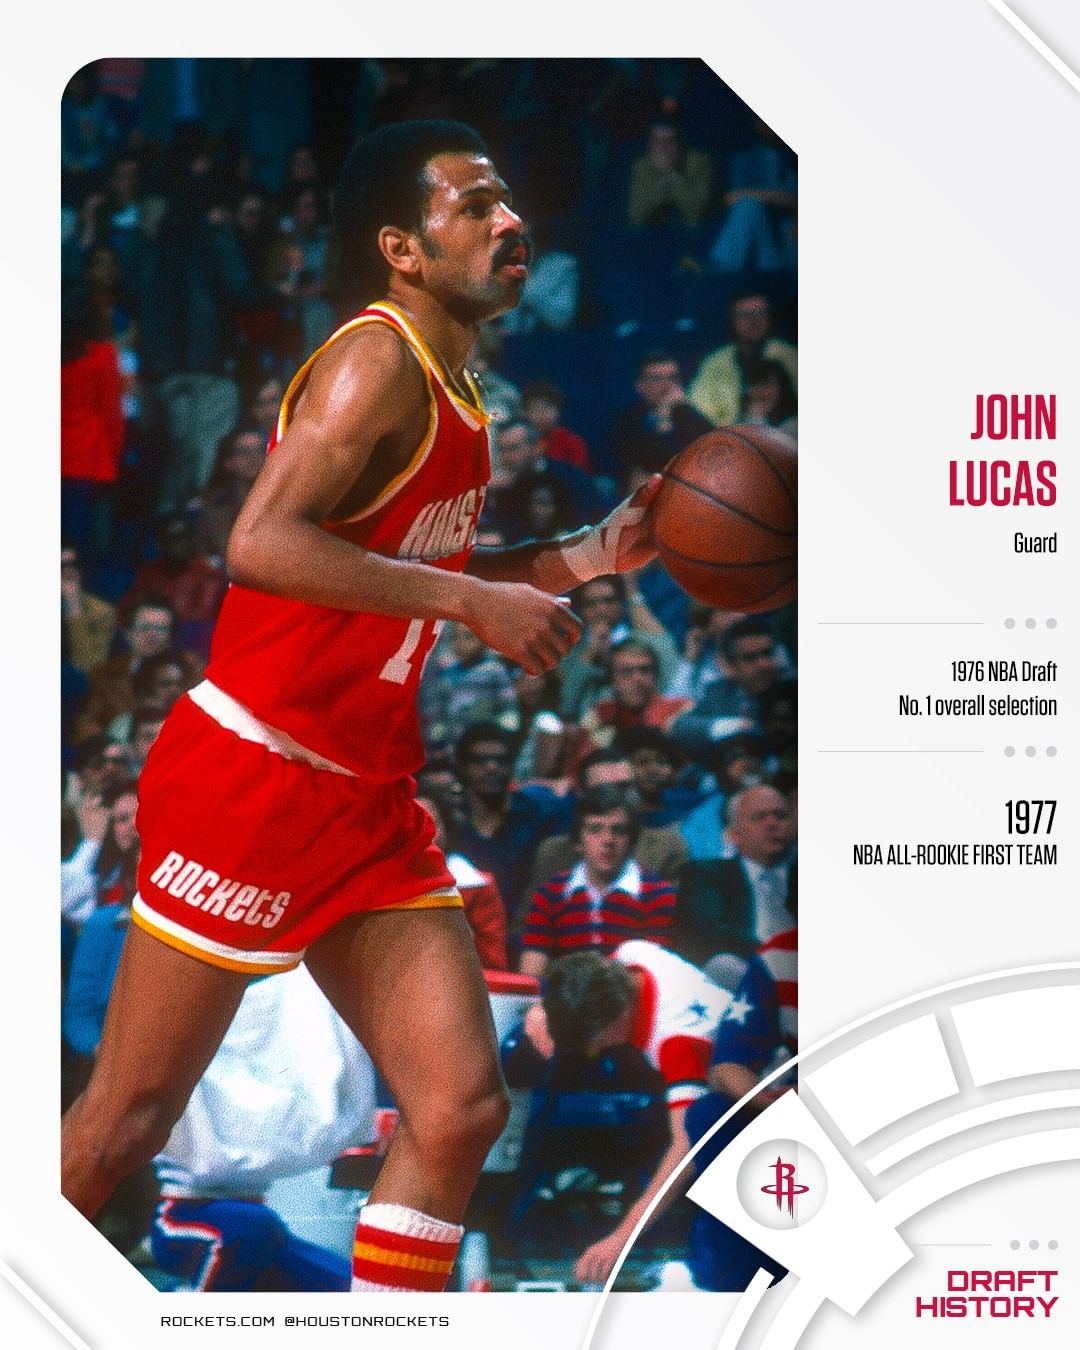 𝐑𝐨𝐚𝐝𝐦𝐚𝐩 𝐭𝐨 𝐭𝐡𝐞 𝐃𝐫𝐚𝐟𝐭  On this day John Lucas was selected 1st overall in the 19...